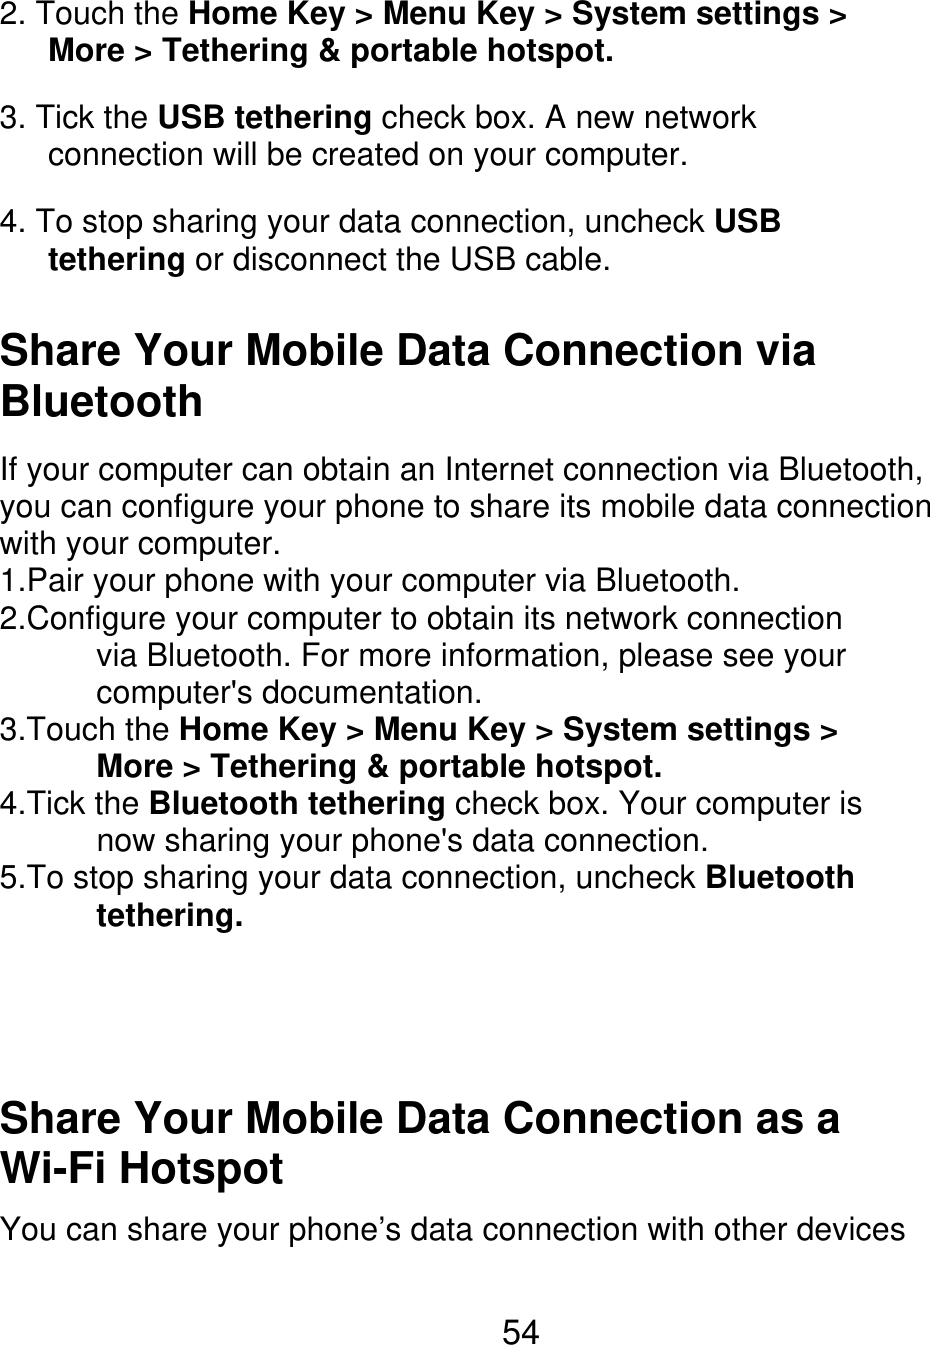 2. Touch the Home Key &gt; Menu Key &gt; System settings &gt;       More &gt; Tethering &amp; portable hotspot. 3. Tick the USB tethering check box. A new network       connection will be created on your computer. 4. To stop sharing your data connection, uncheck USB    tethering or disconnect the USB cable. Share Your Mobile Data Connection via Bluetooth If your computer can obtain an Internet connection via Bluetooth, you can configure your phone to share its mobile data connection with your computer. 1.Pair your phone with your computer via Bluetooth. 2.Configure your computer to obtain its network connection       via Bluetooth. For more information, please see your       computer&apos;s documentation. 3.Touch the Home Key &gt; Menu Key &gt; System settings &gt;       More &gt; Tethering &amp; portable hotspot. 4.Tick the Bluetooth tethering check box. Your computer is       now sharing your phone&apos;s data connection. 5.To stop sharing your data connection, uncheck Bluetooth       tethering. Share Your Mobile Data Connection as a Wi-Fi Hotspot You can share your phone’s data connection with other devices 54 